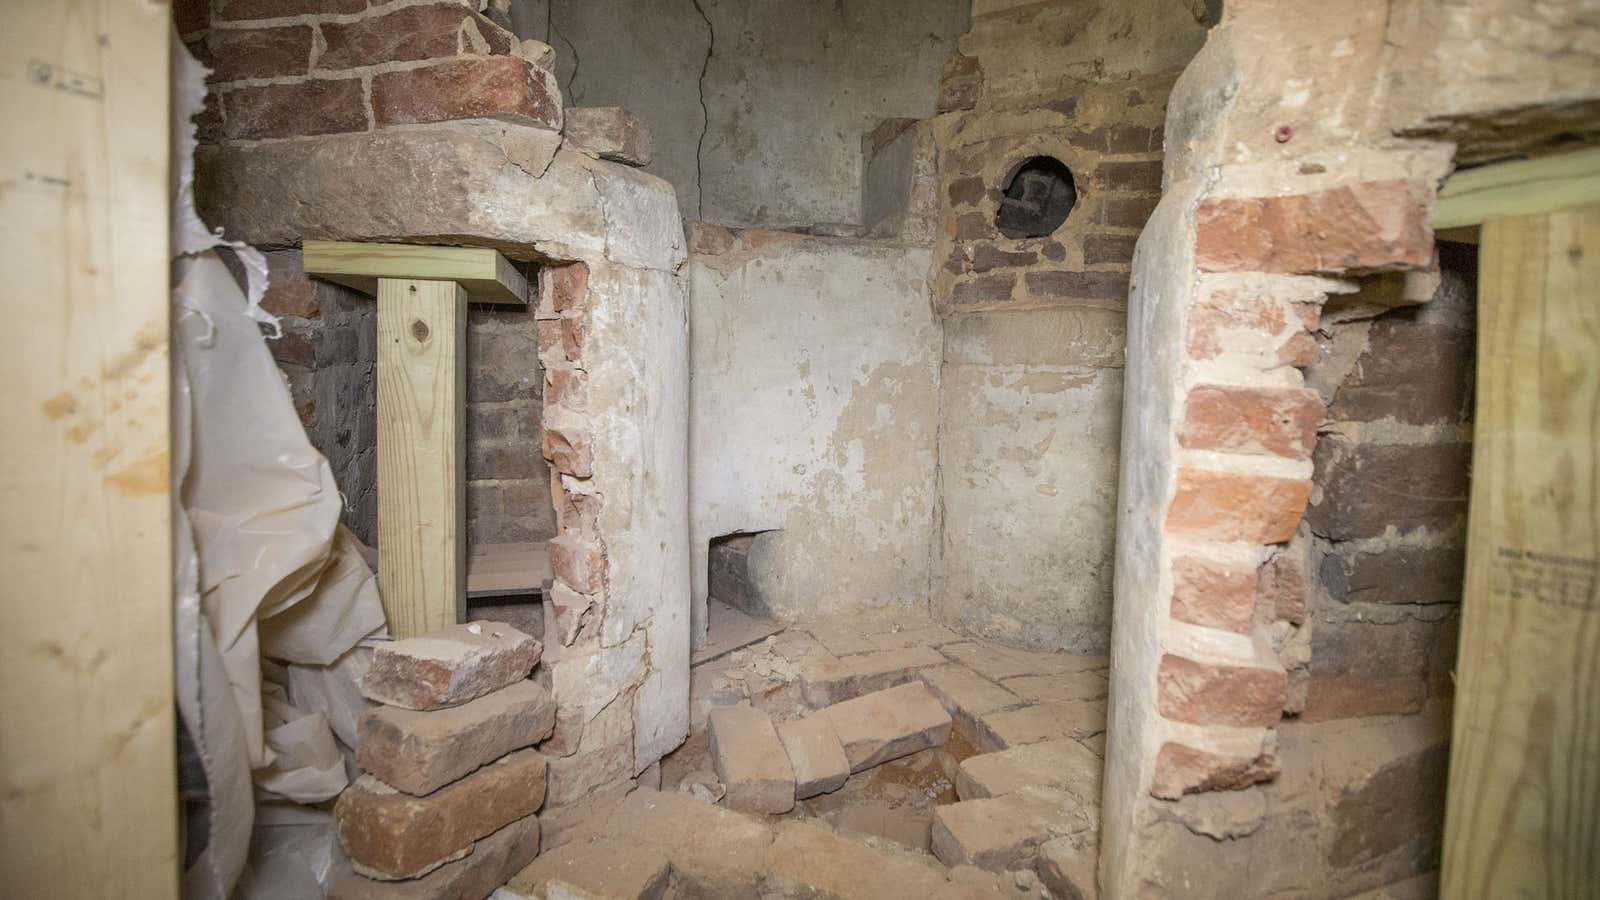 The hearth was sealed within the walls of the Rotunda.